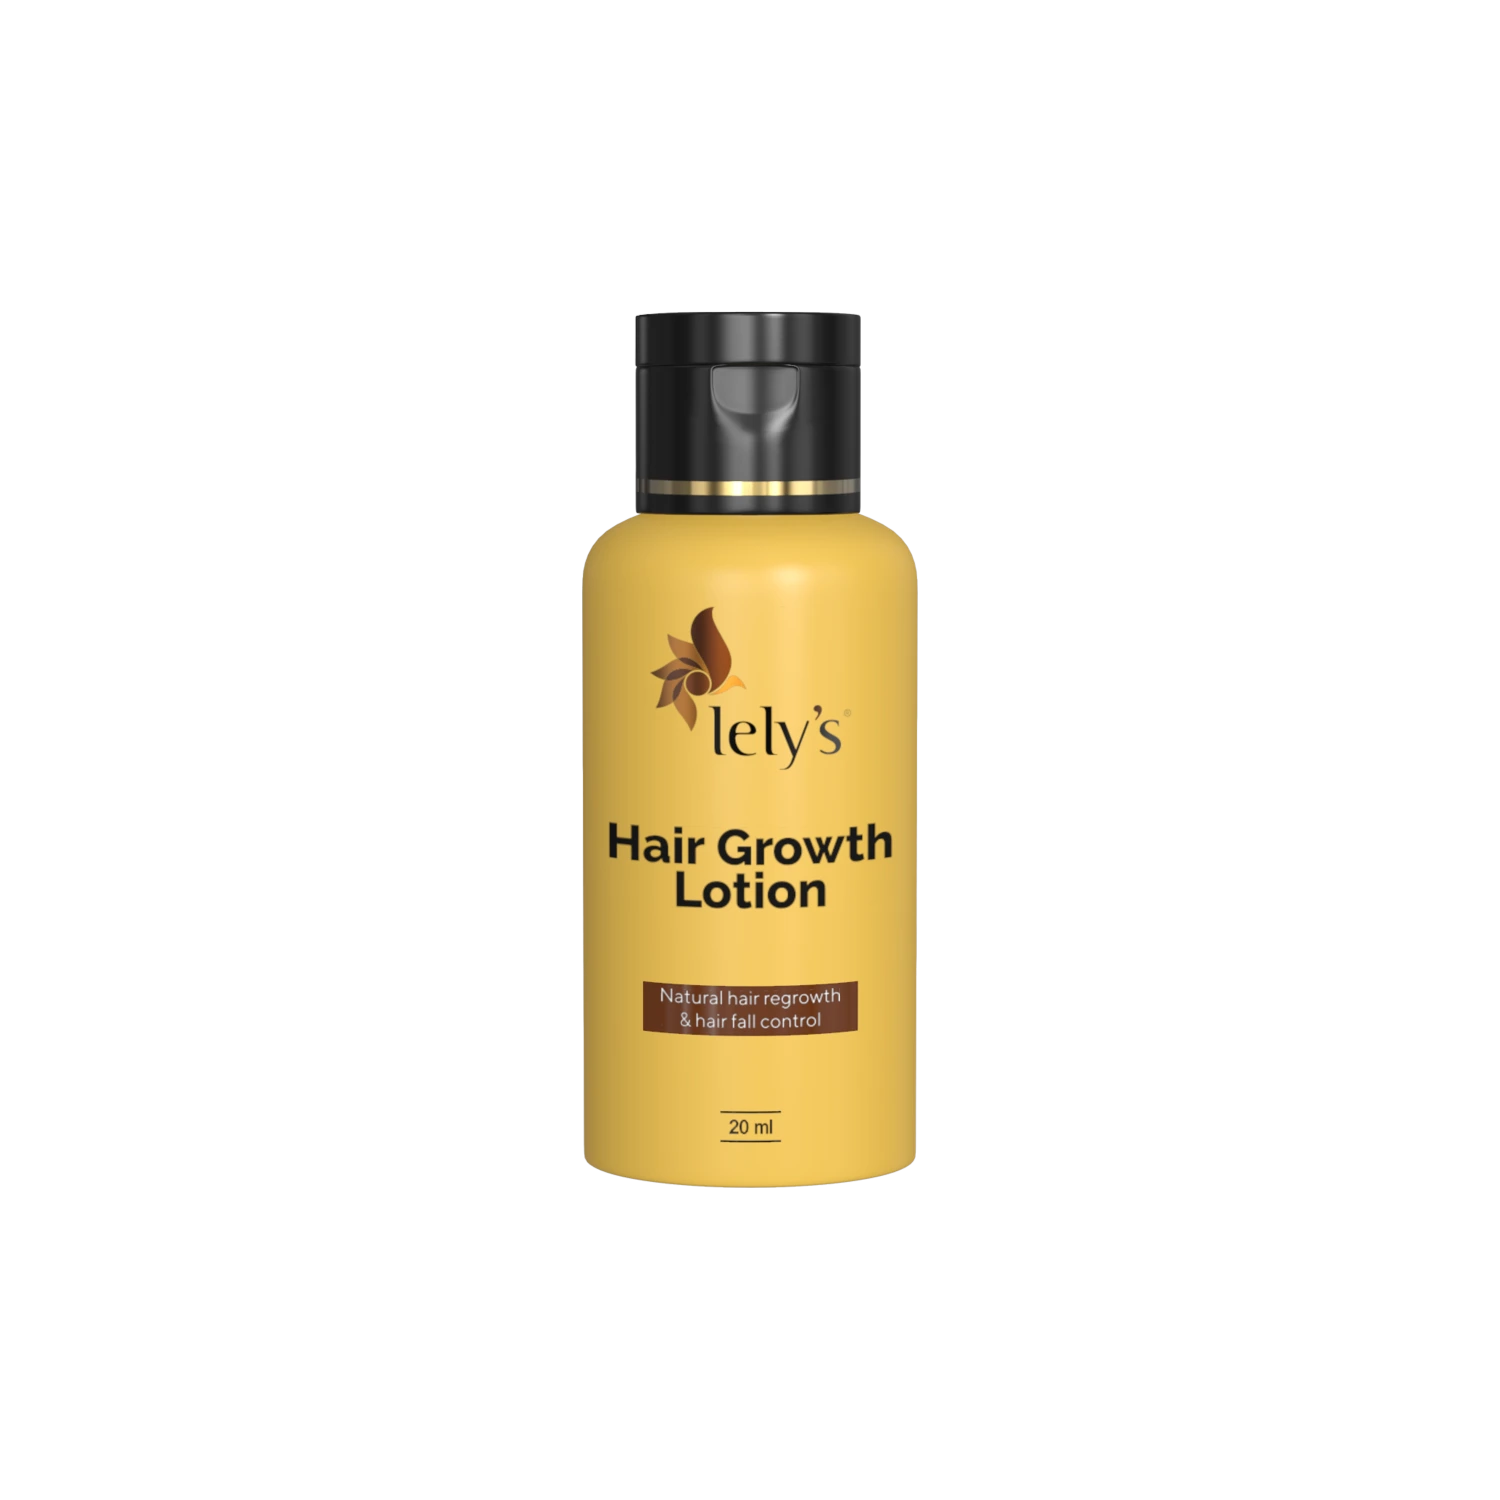 Lely's Hair Growth Lotion Travel Pack